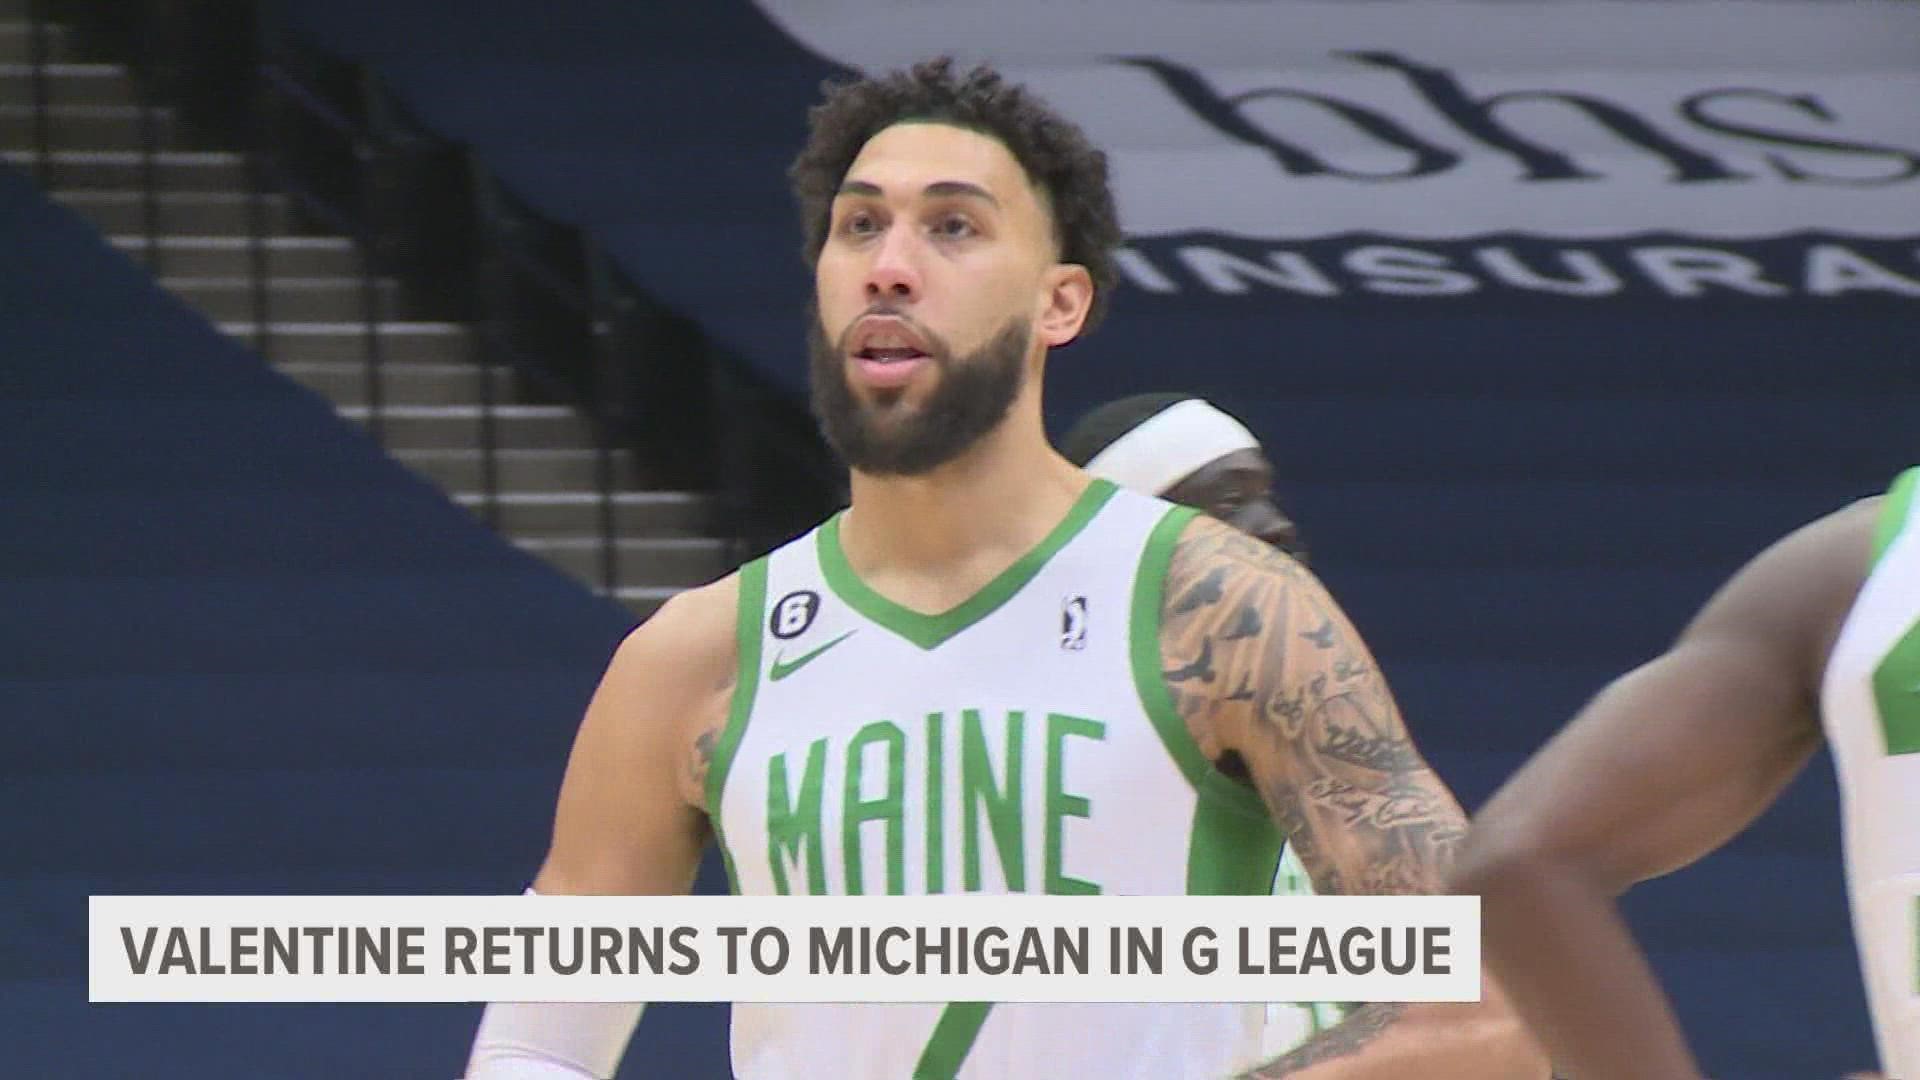 Denzel Valentine of the Maine Celtics shoots the ball against the